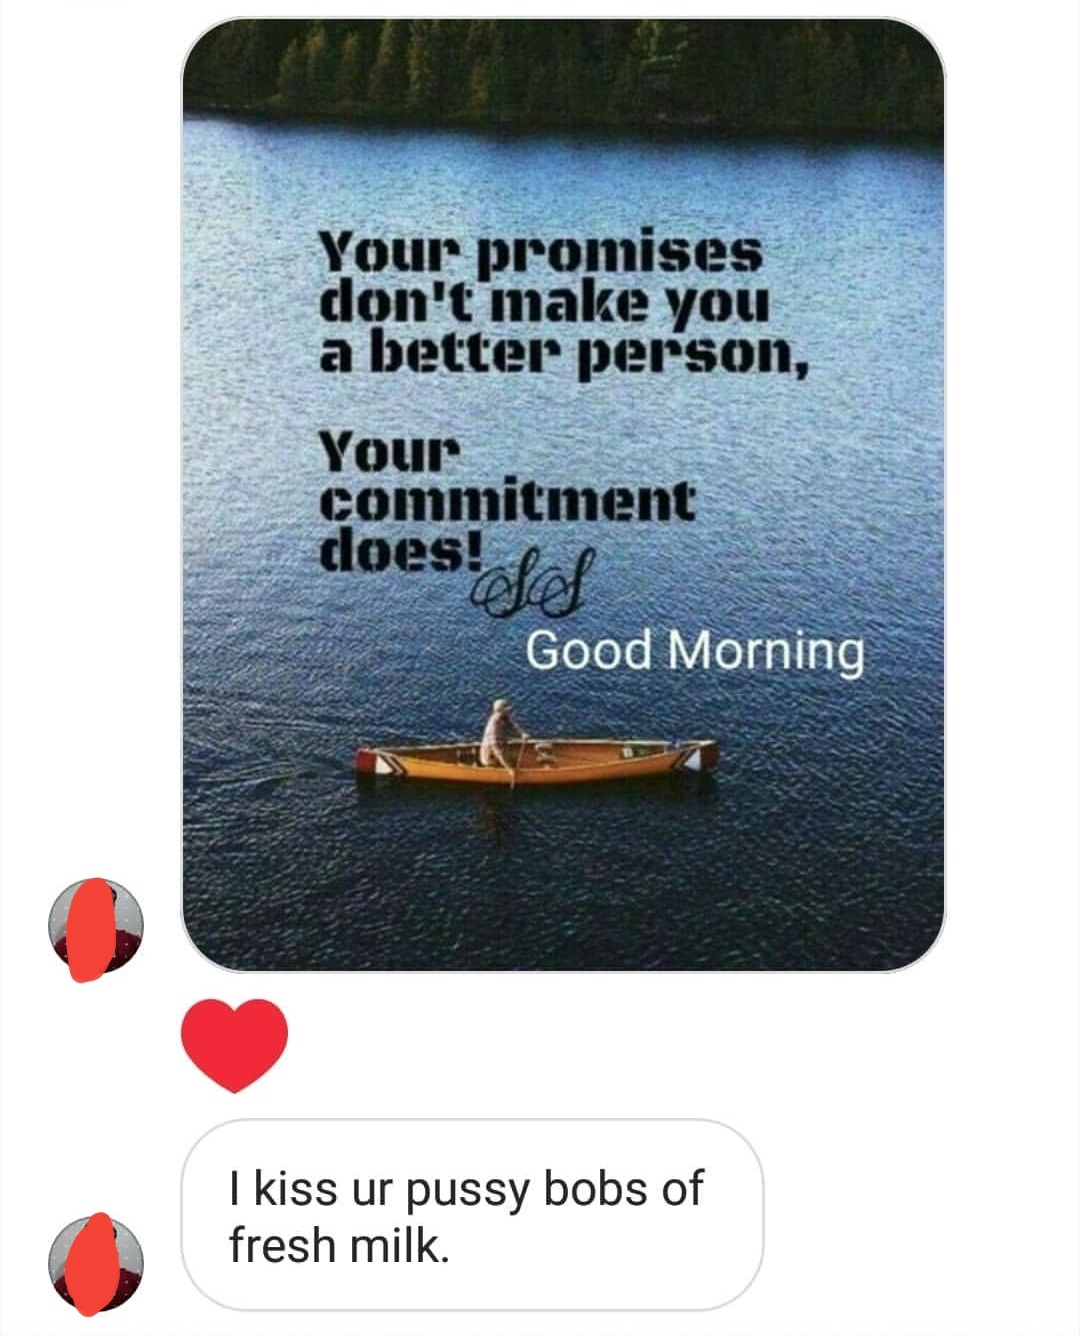 Your promises don't make you a better person, Your commitment does! Good Morning I kiss ur pussy bobs of fresh milk.